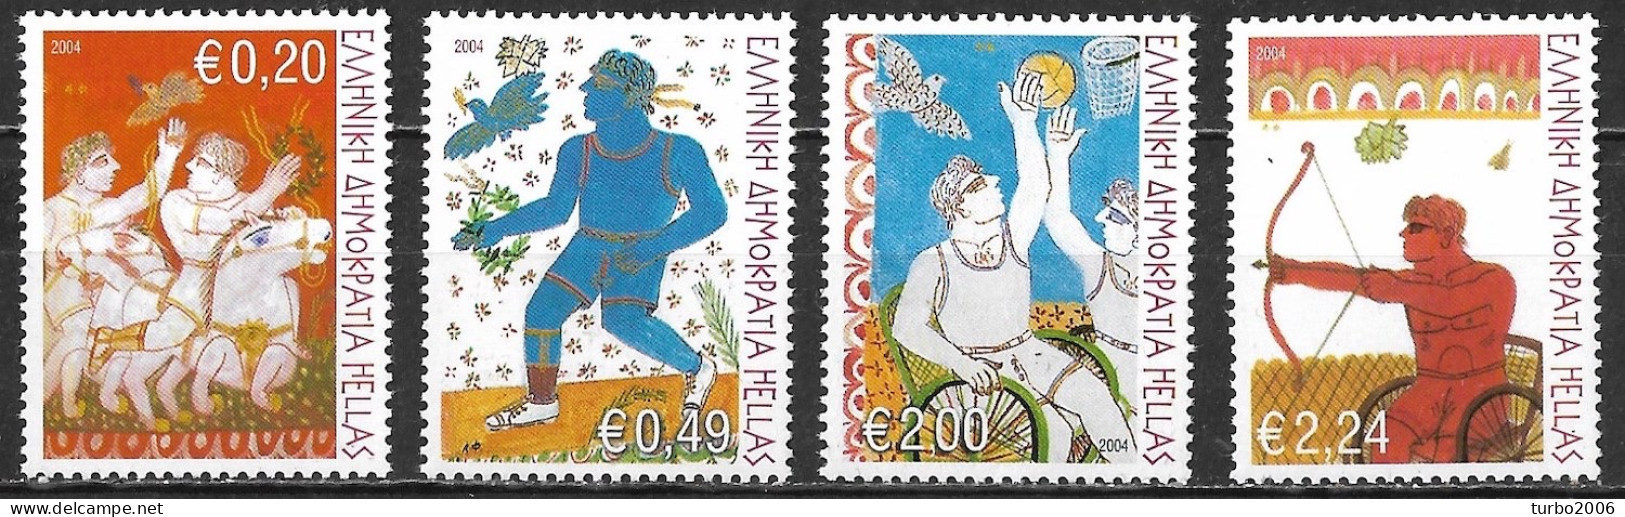 GREECE 2004 The Power Of Will Complete MNH Set Vl. 2249 / 2252 - Nuevos